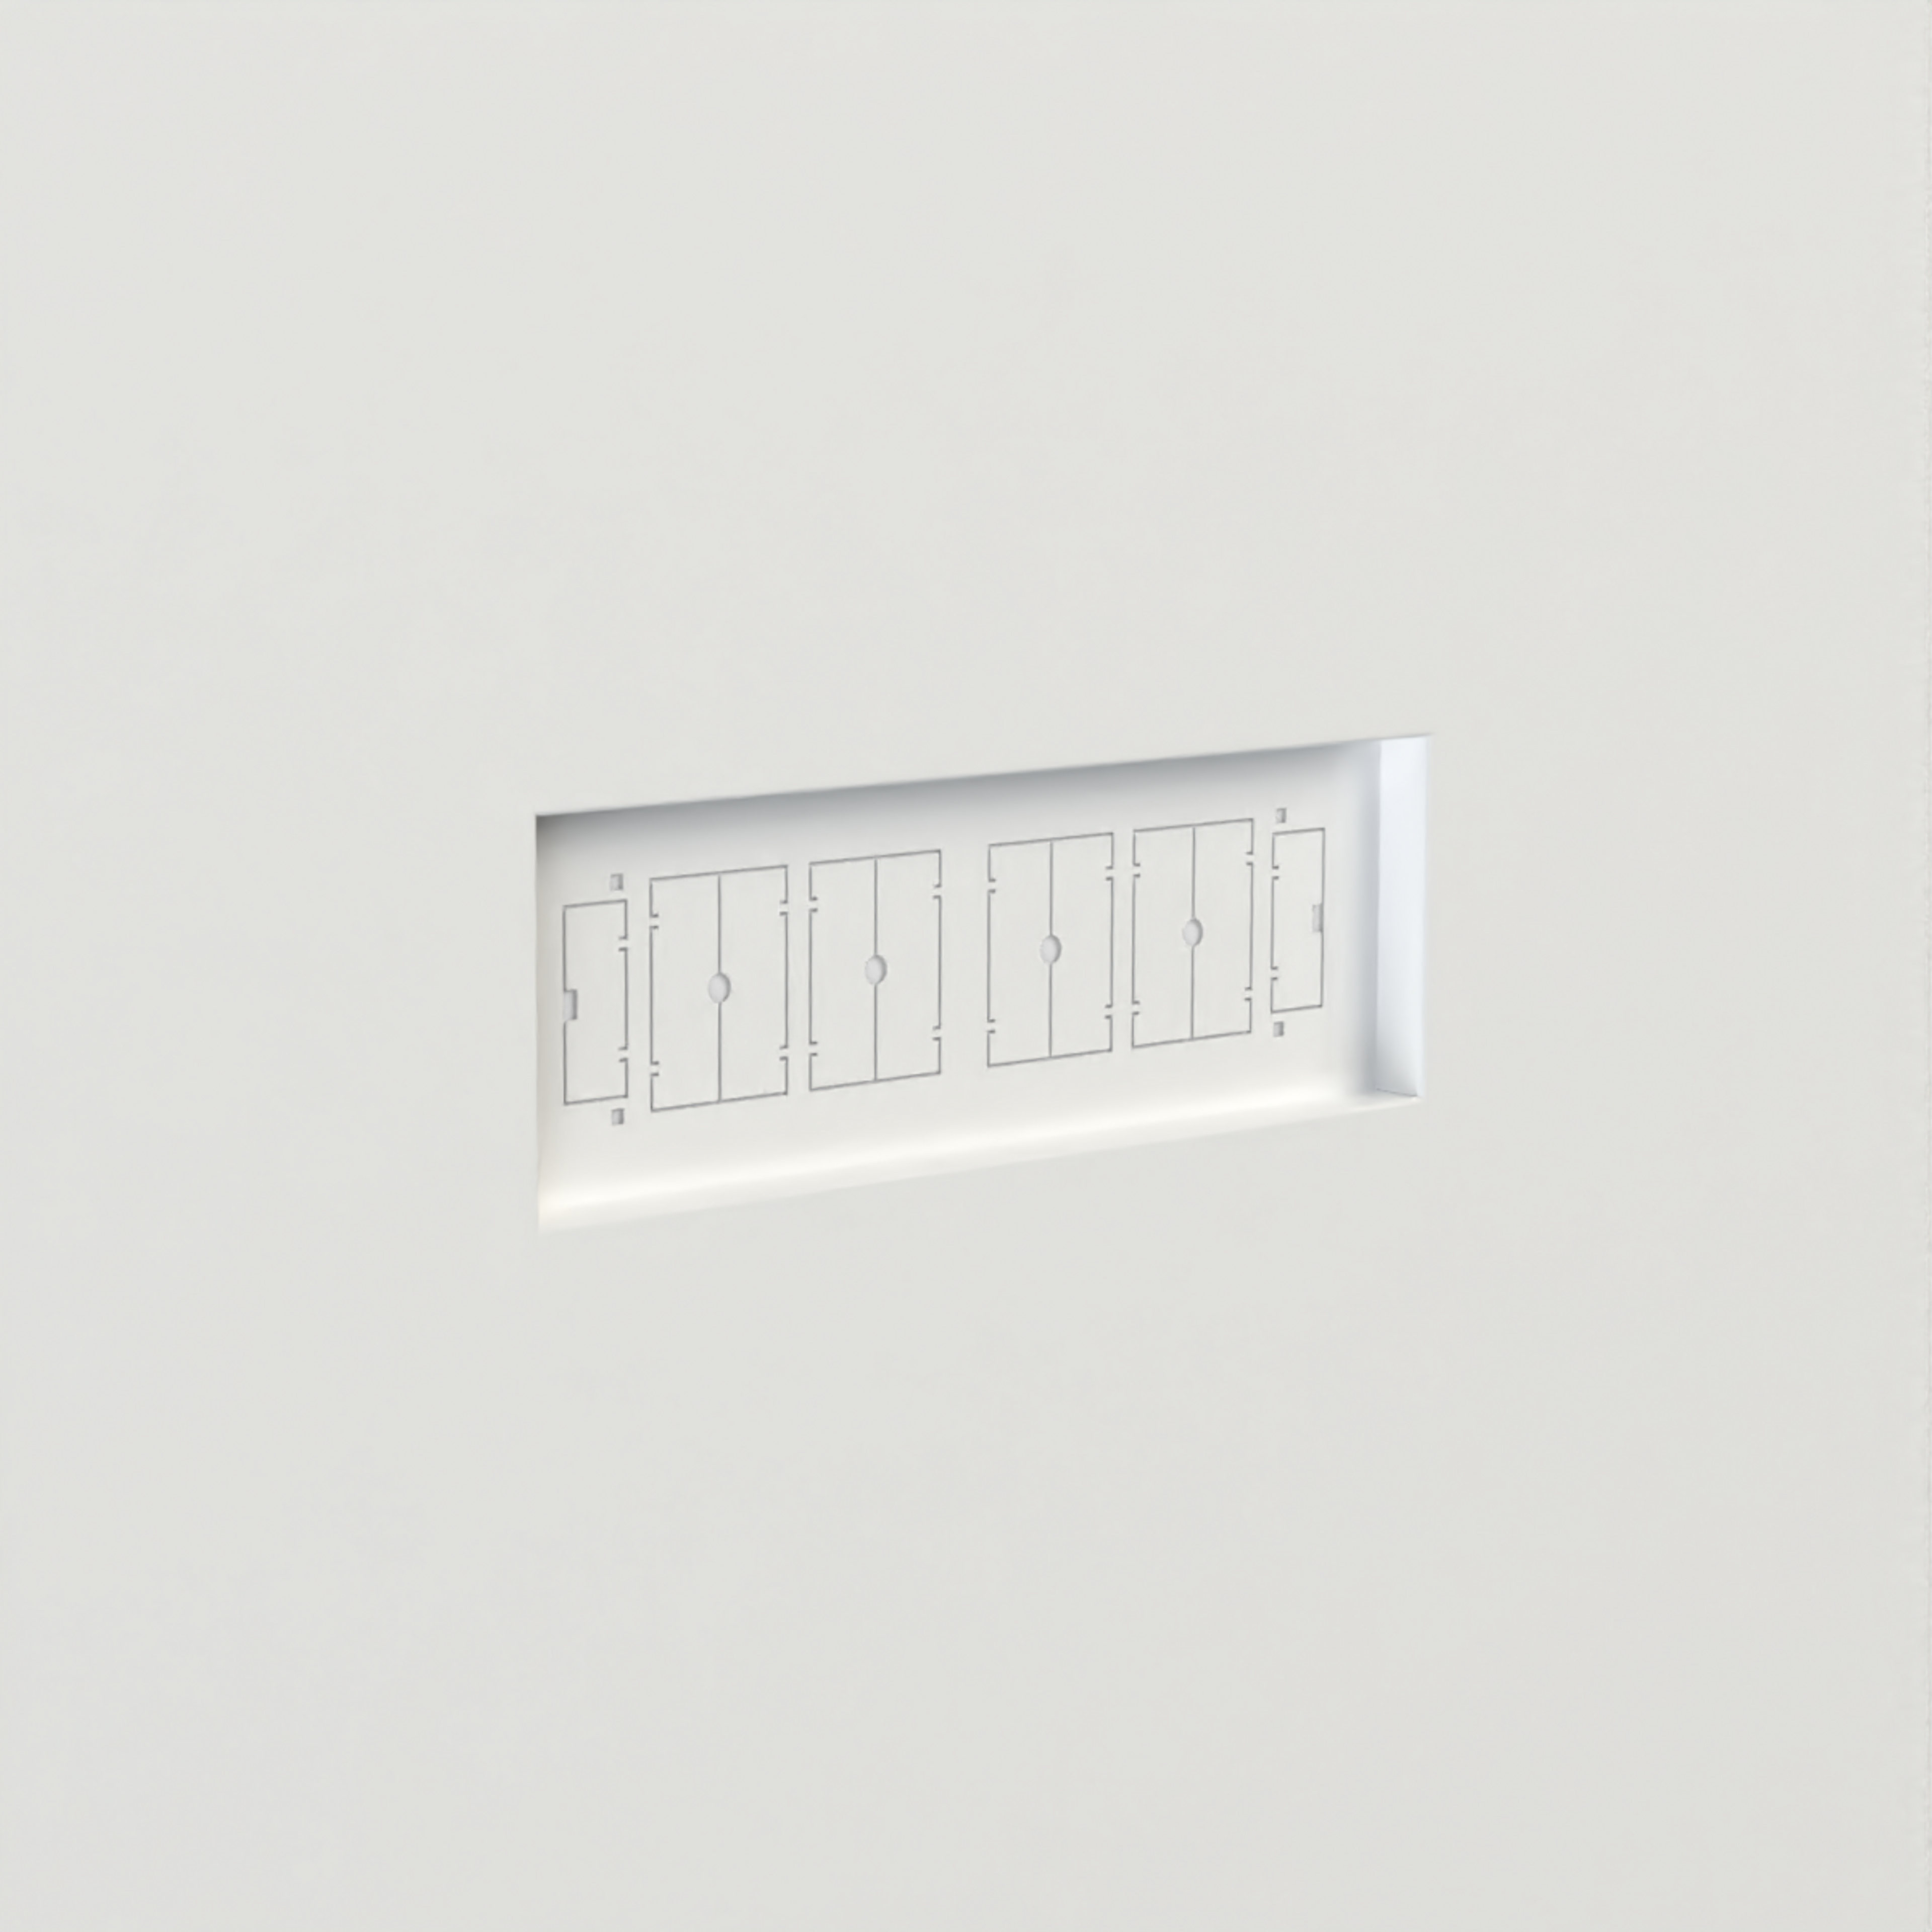 High Performance Flush Wall Vent [Luxe]